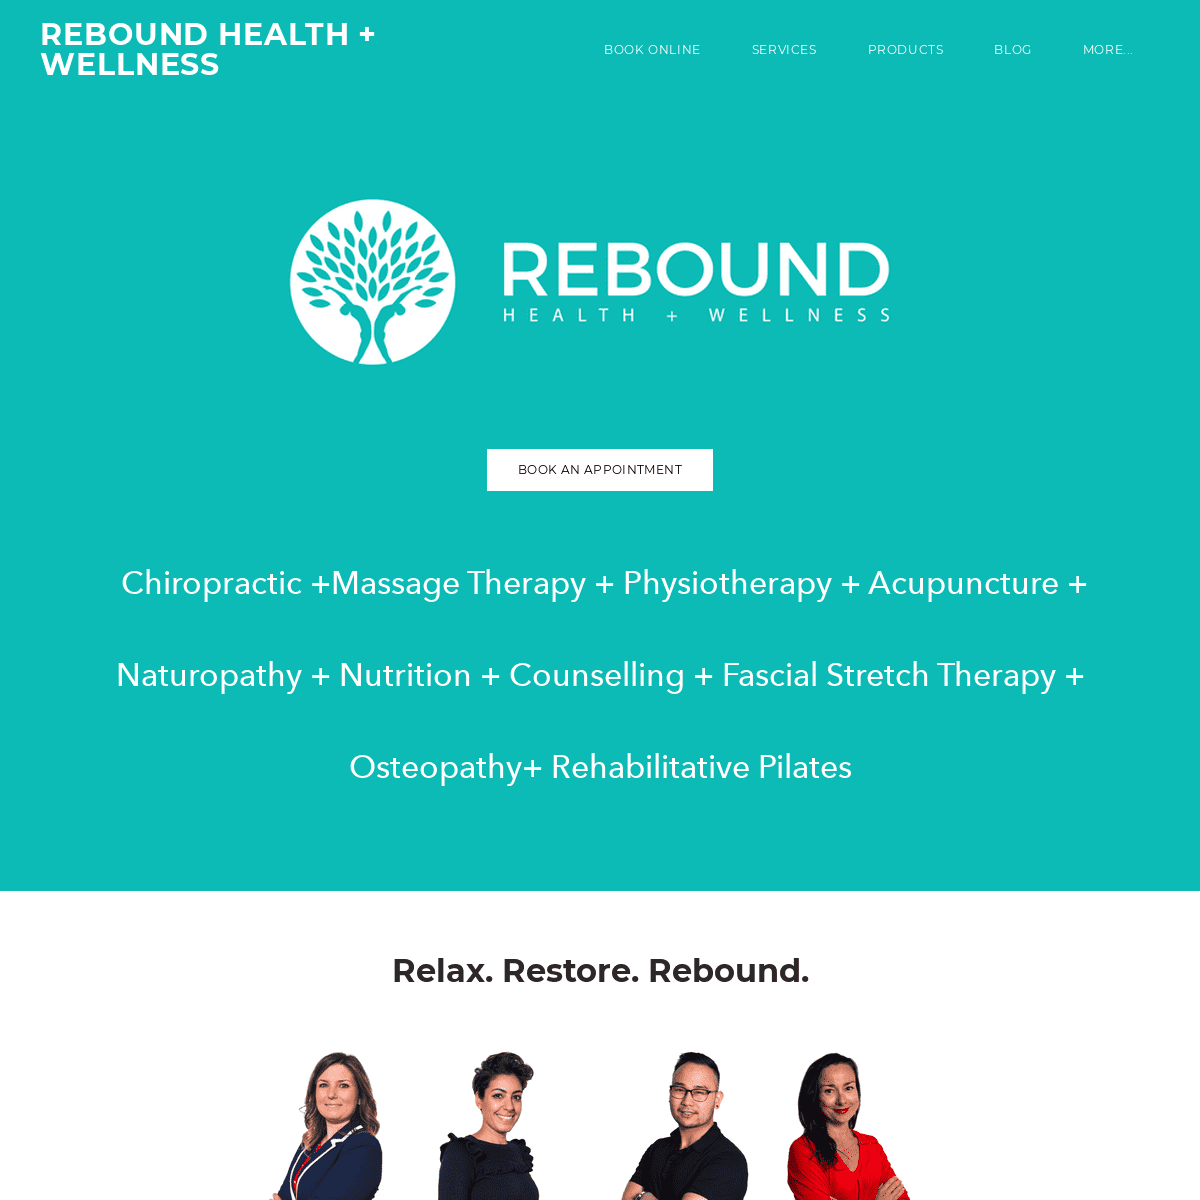 A complete backup of reboundwellness.ca